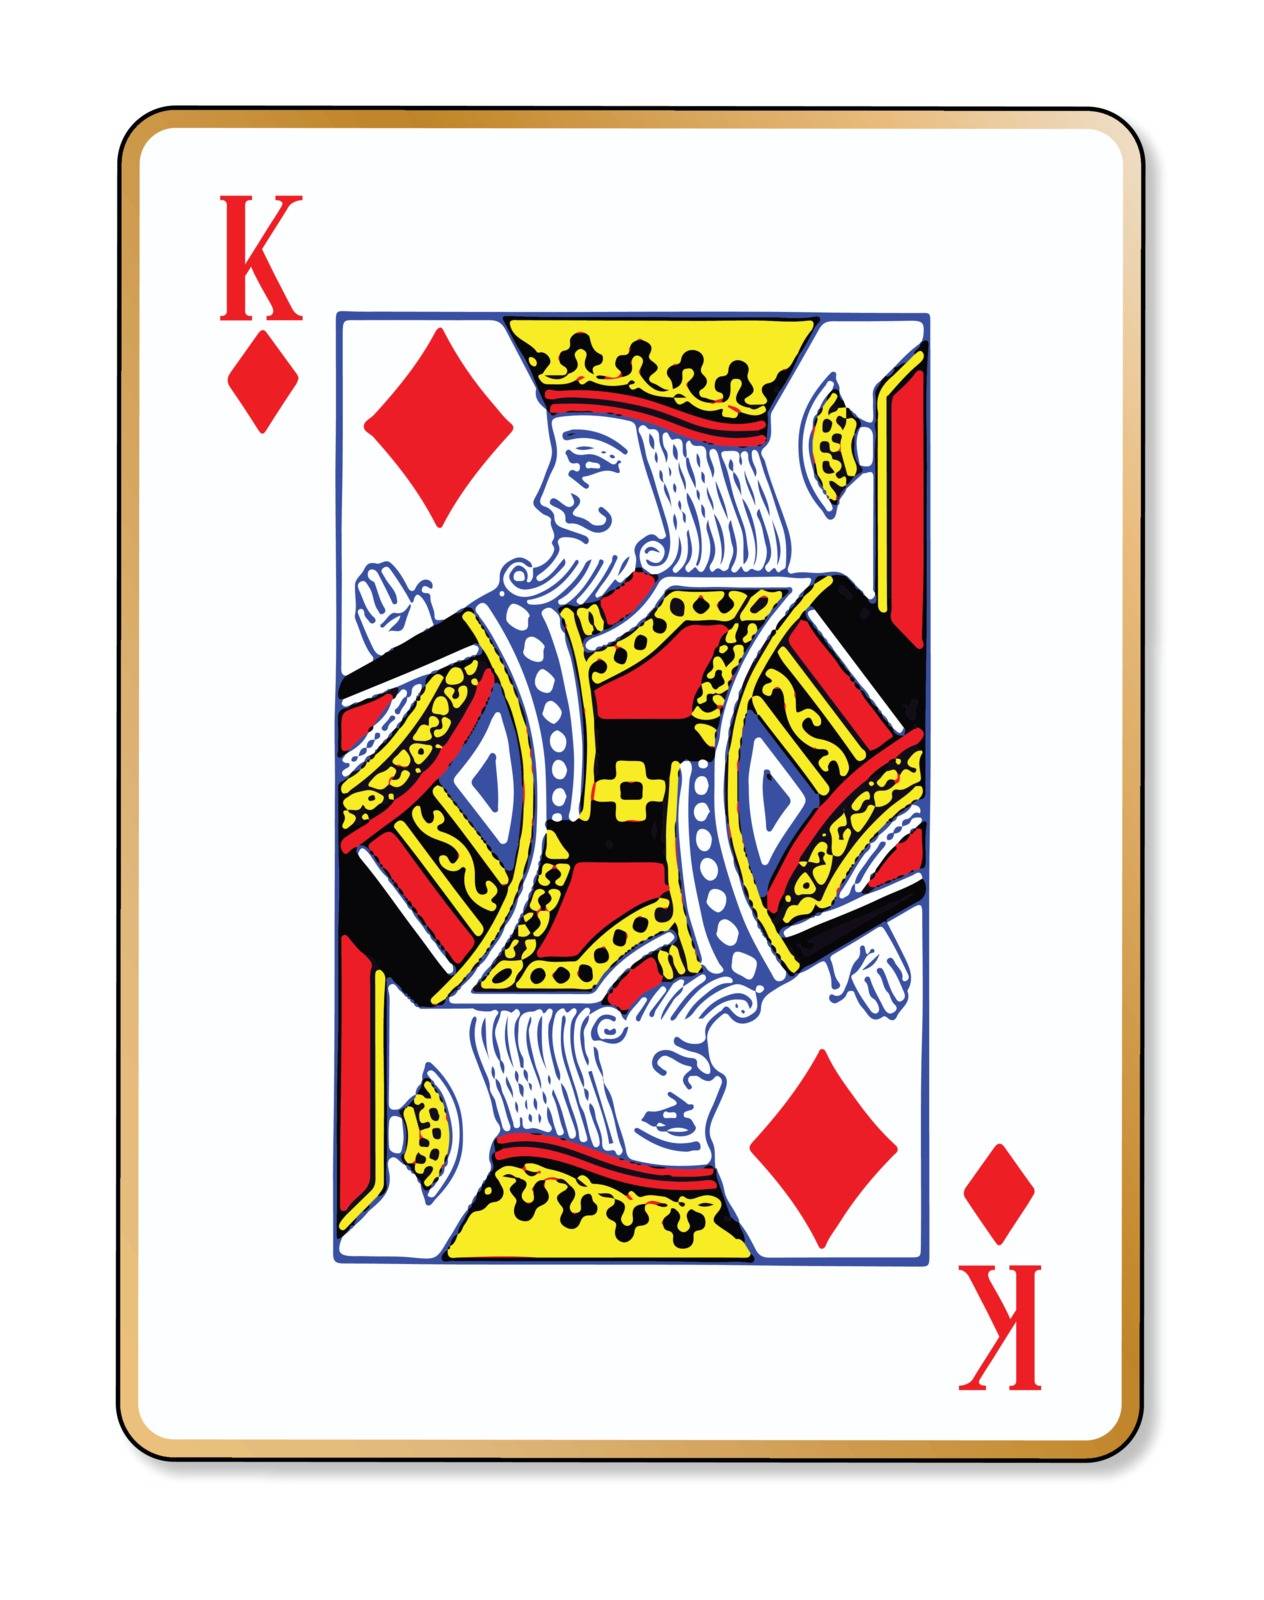 The playing card the King of diamonds over a white background